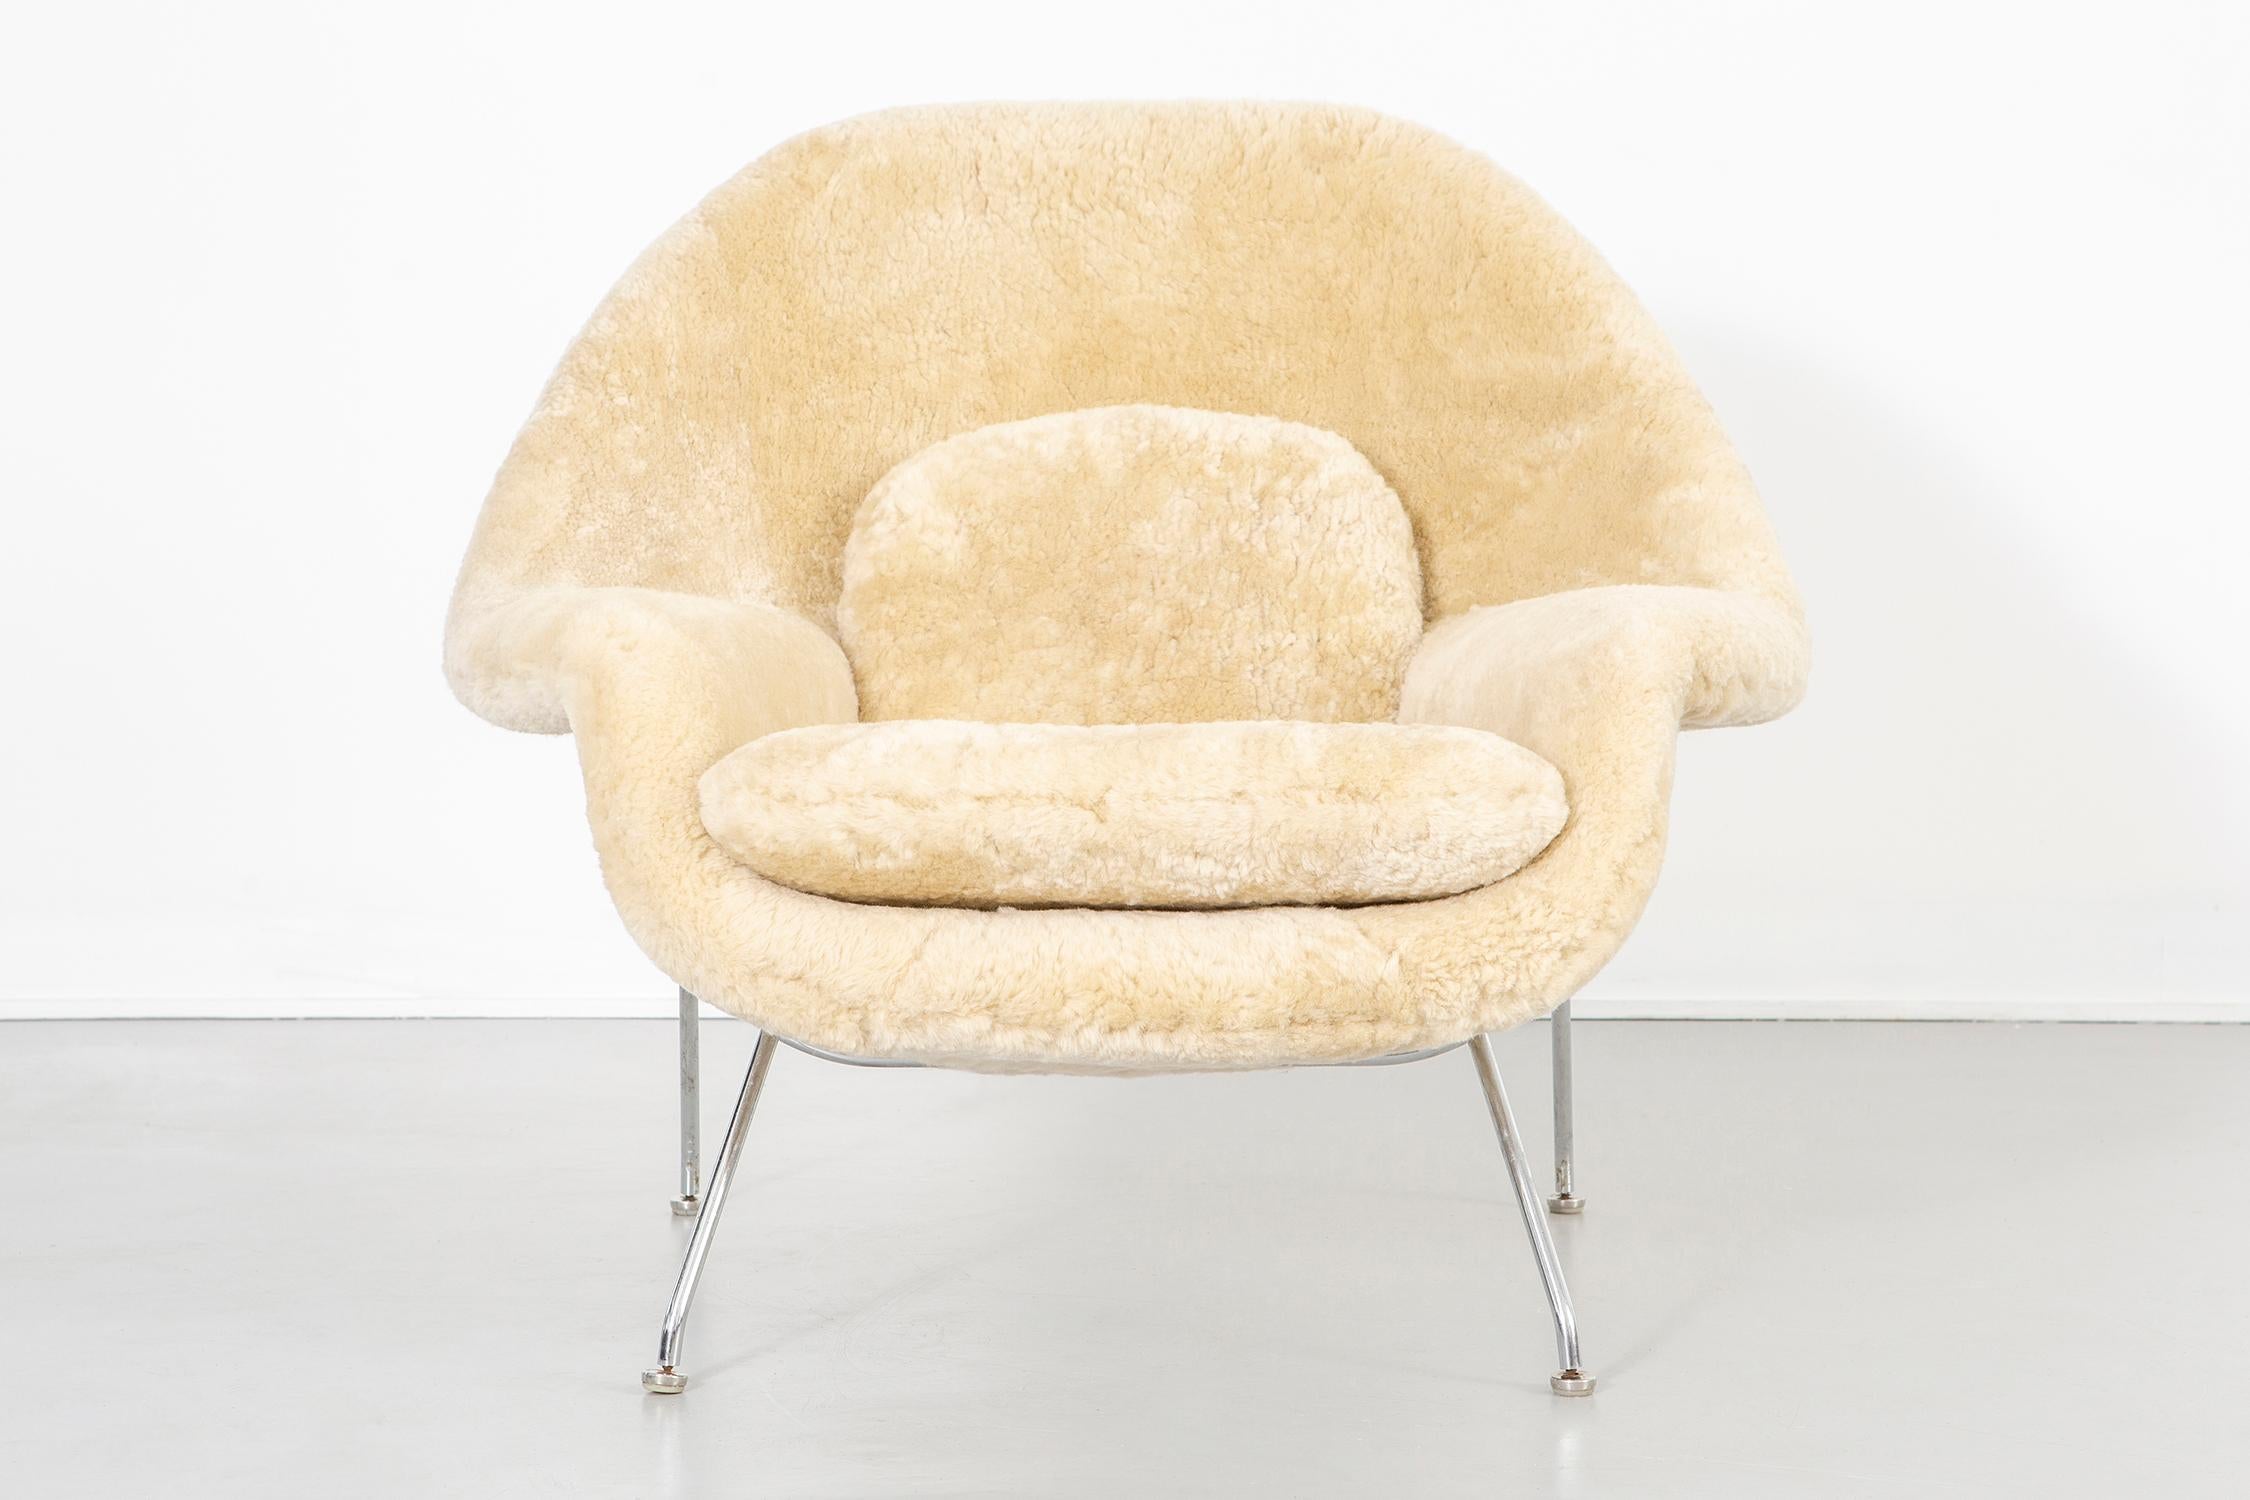 Womb chair

designed by Eero Saarinen for Knoll

USA, d 1948 / circa 1960s

Reupholstered in wool shearling and steel frame

Measures: 35 ½